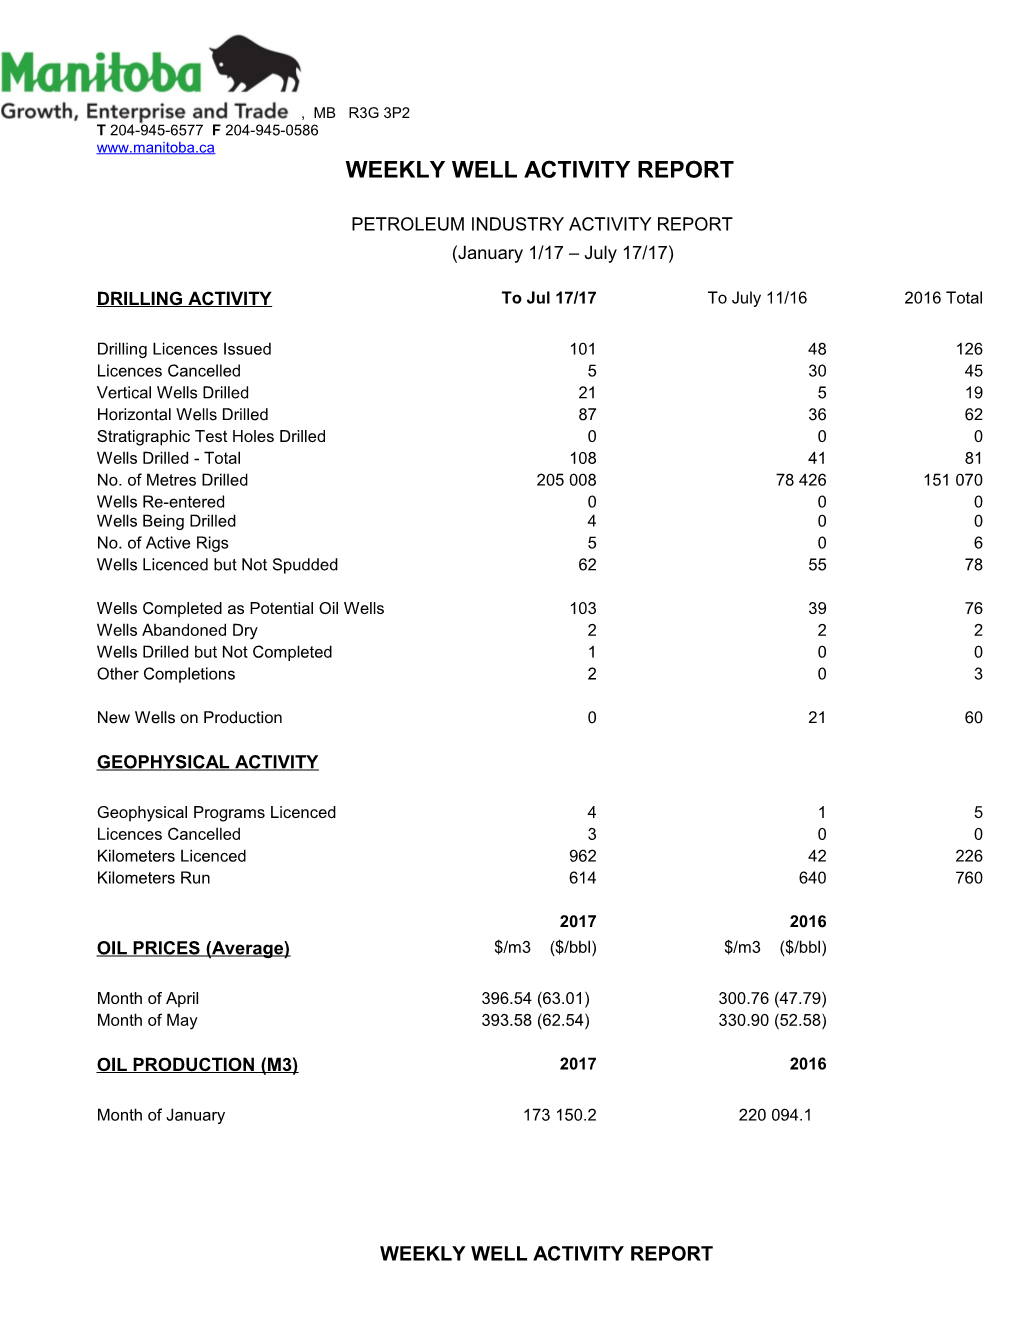 Weekly Well Activity Report s19